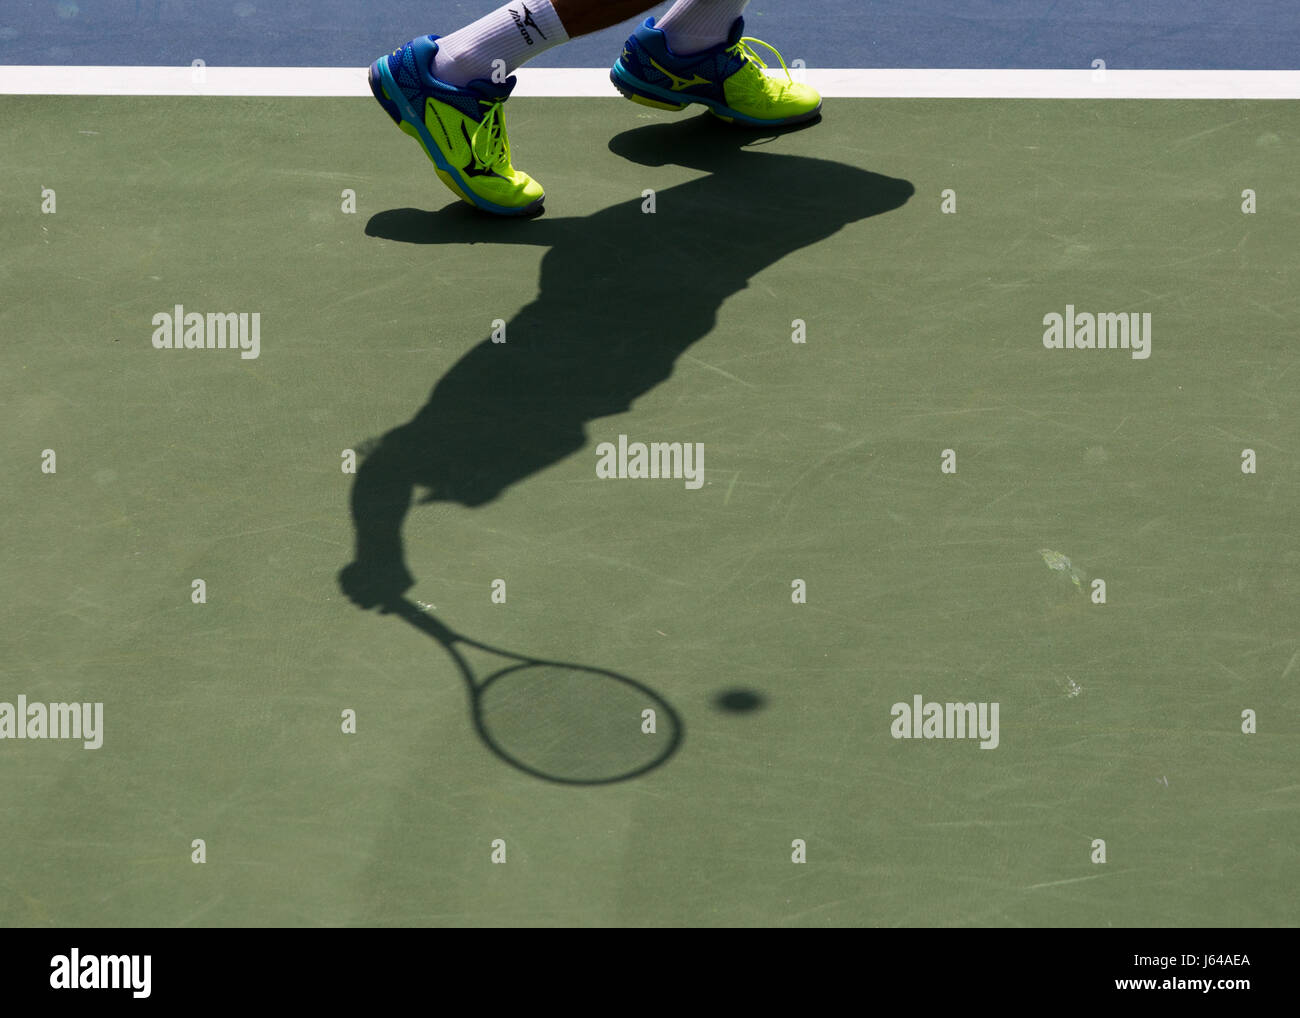 Shadow of tennis player Stock Photo